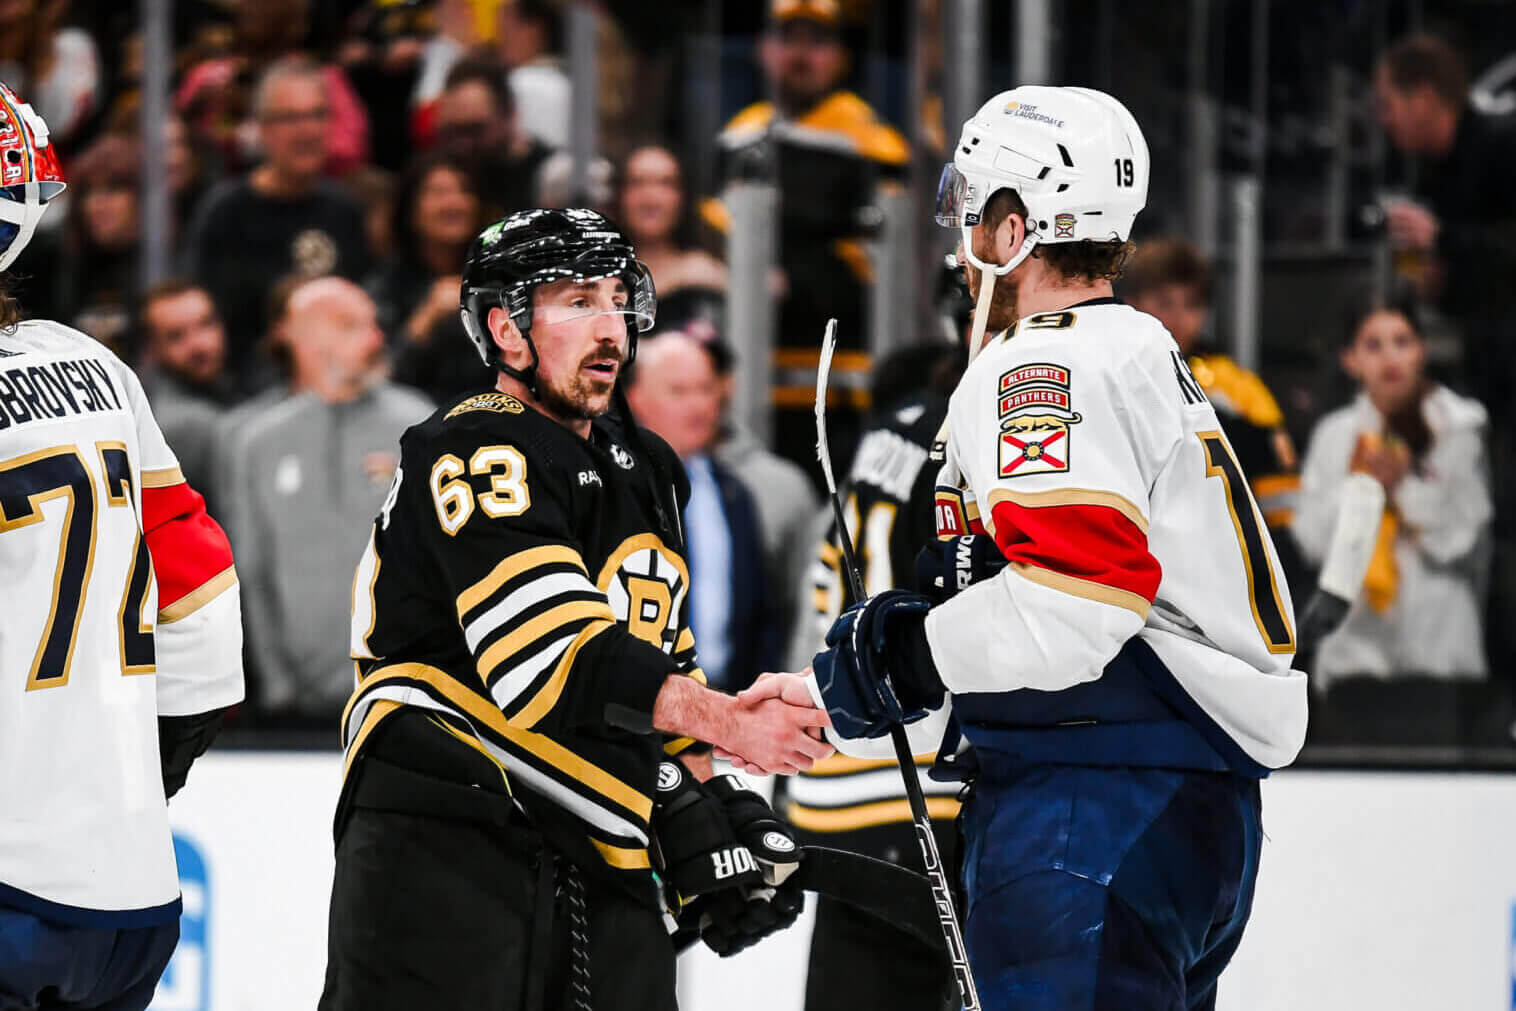 Buckley: Brad Marchand admits he ‘wasn’t upfront’ about his health in face of ticking clock